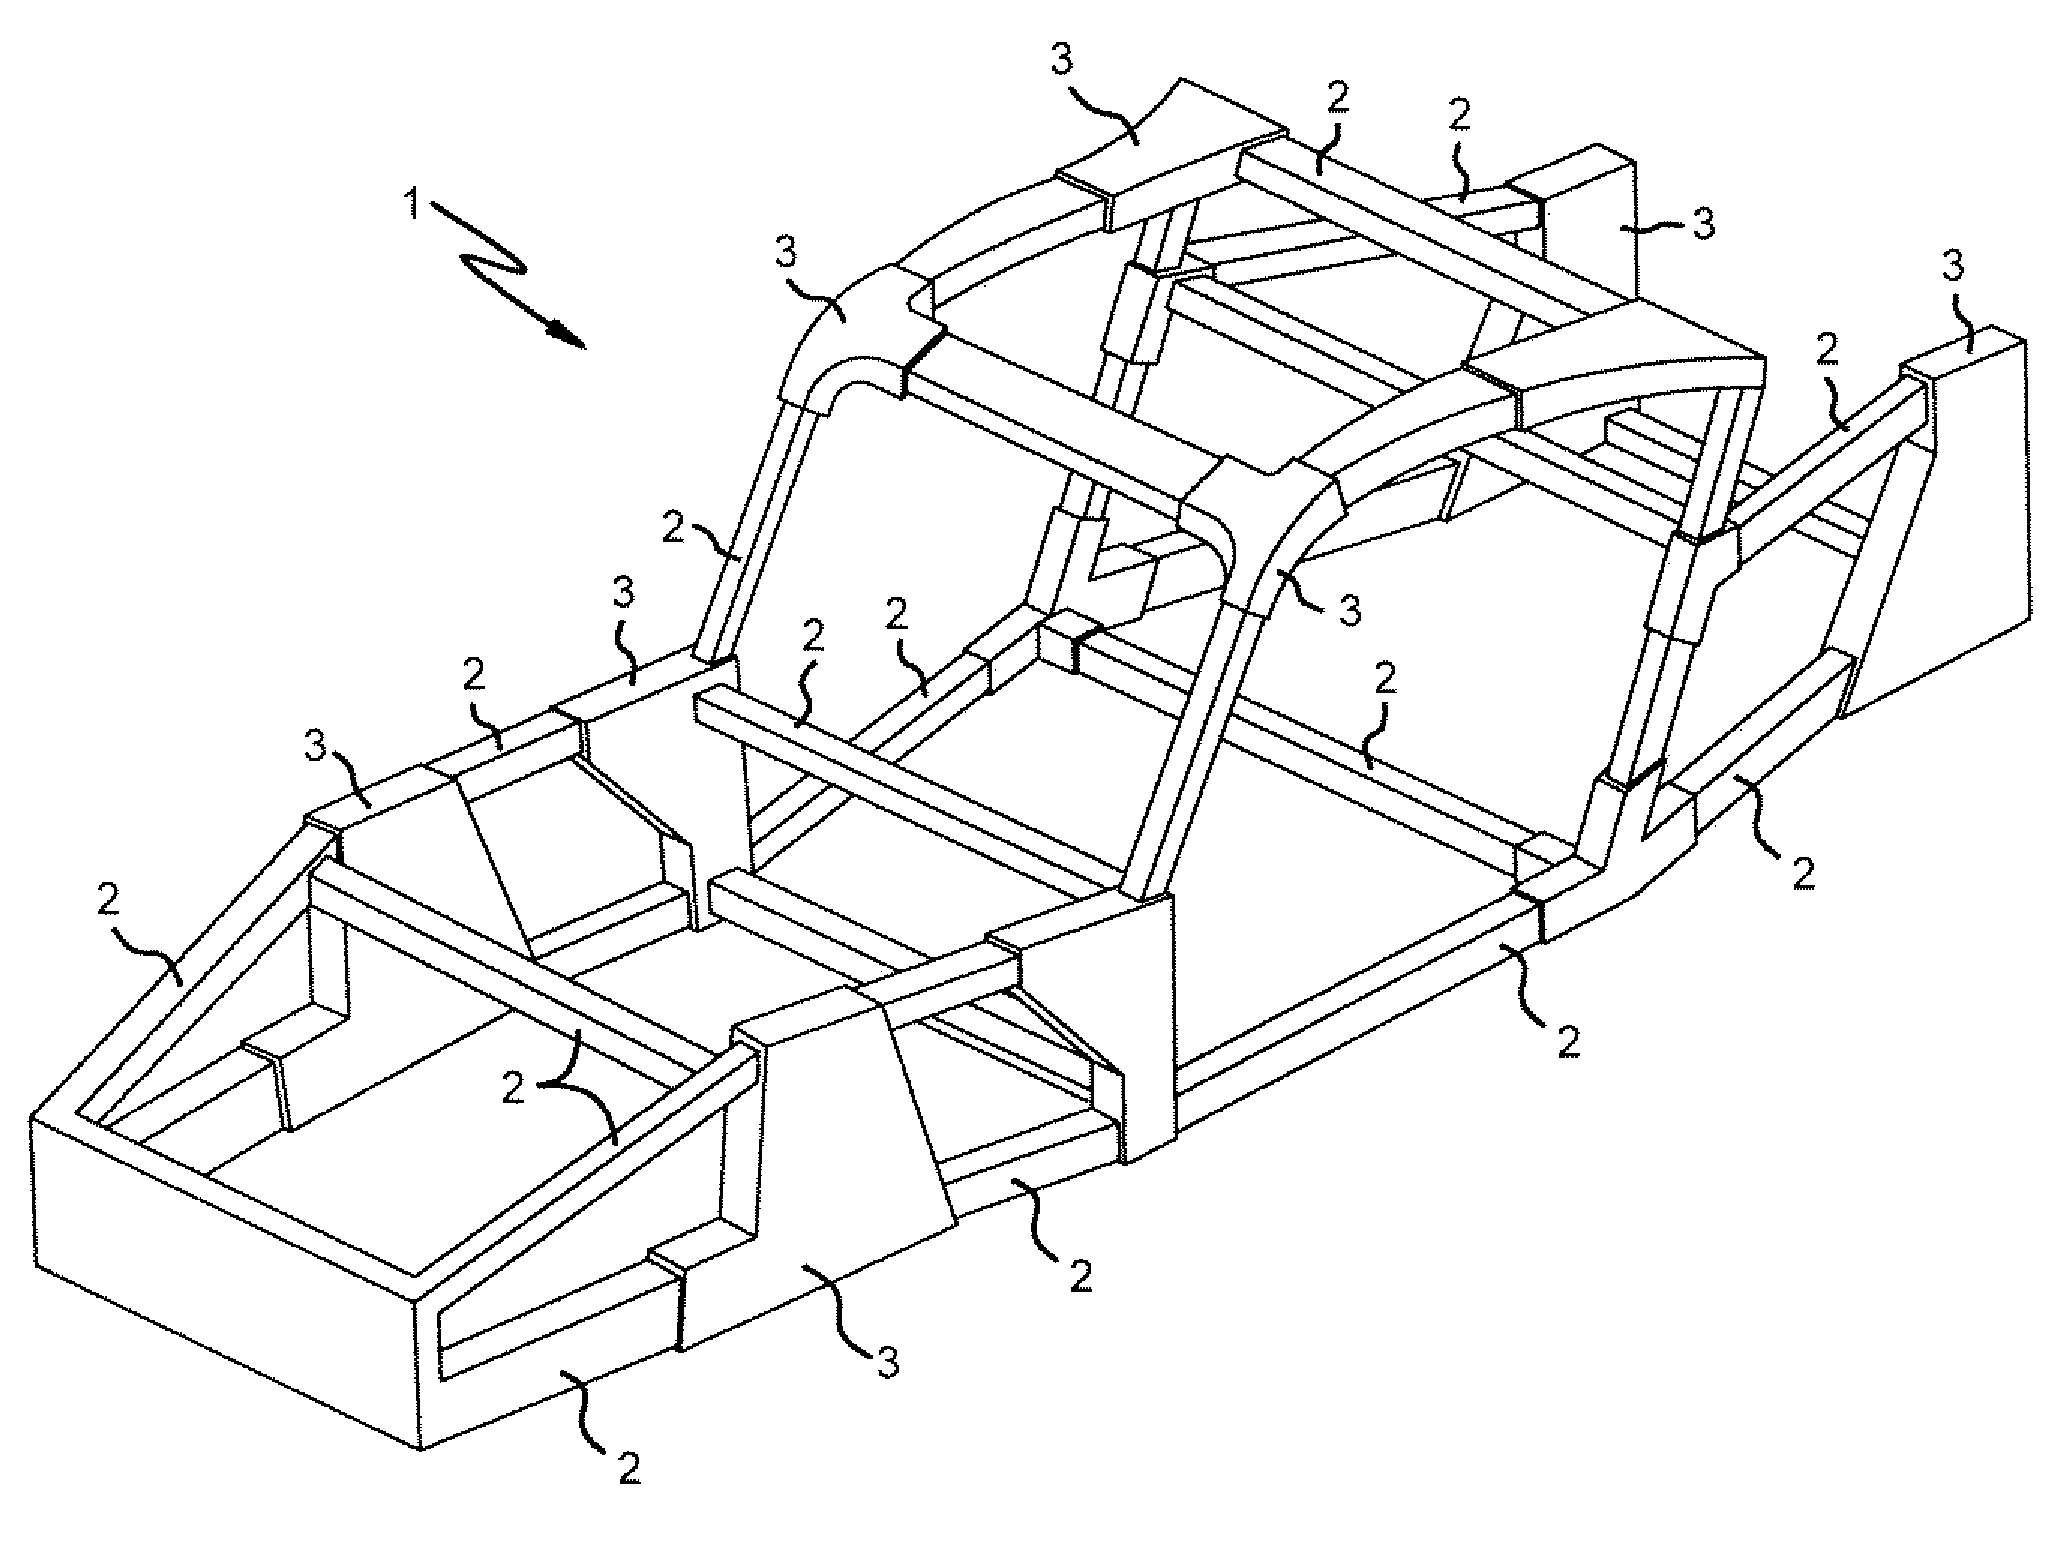 Metal frame made up of the union of a plurality of extruded elements, and method for its fabrication